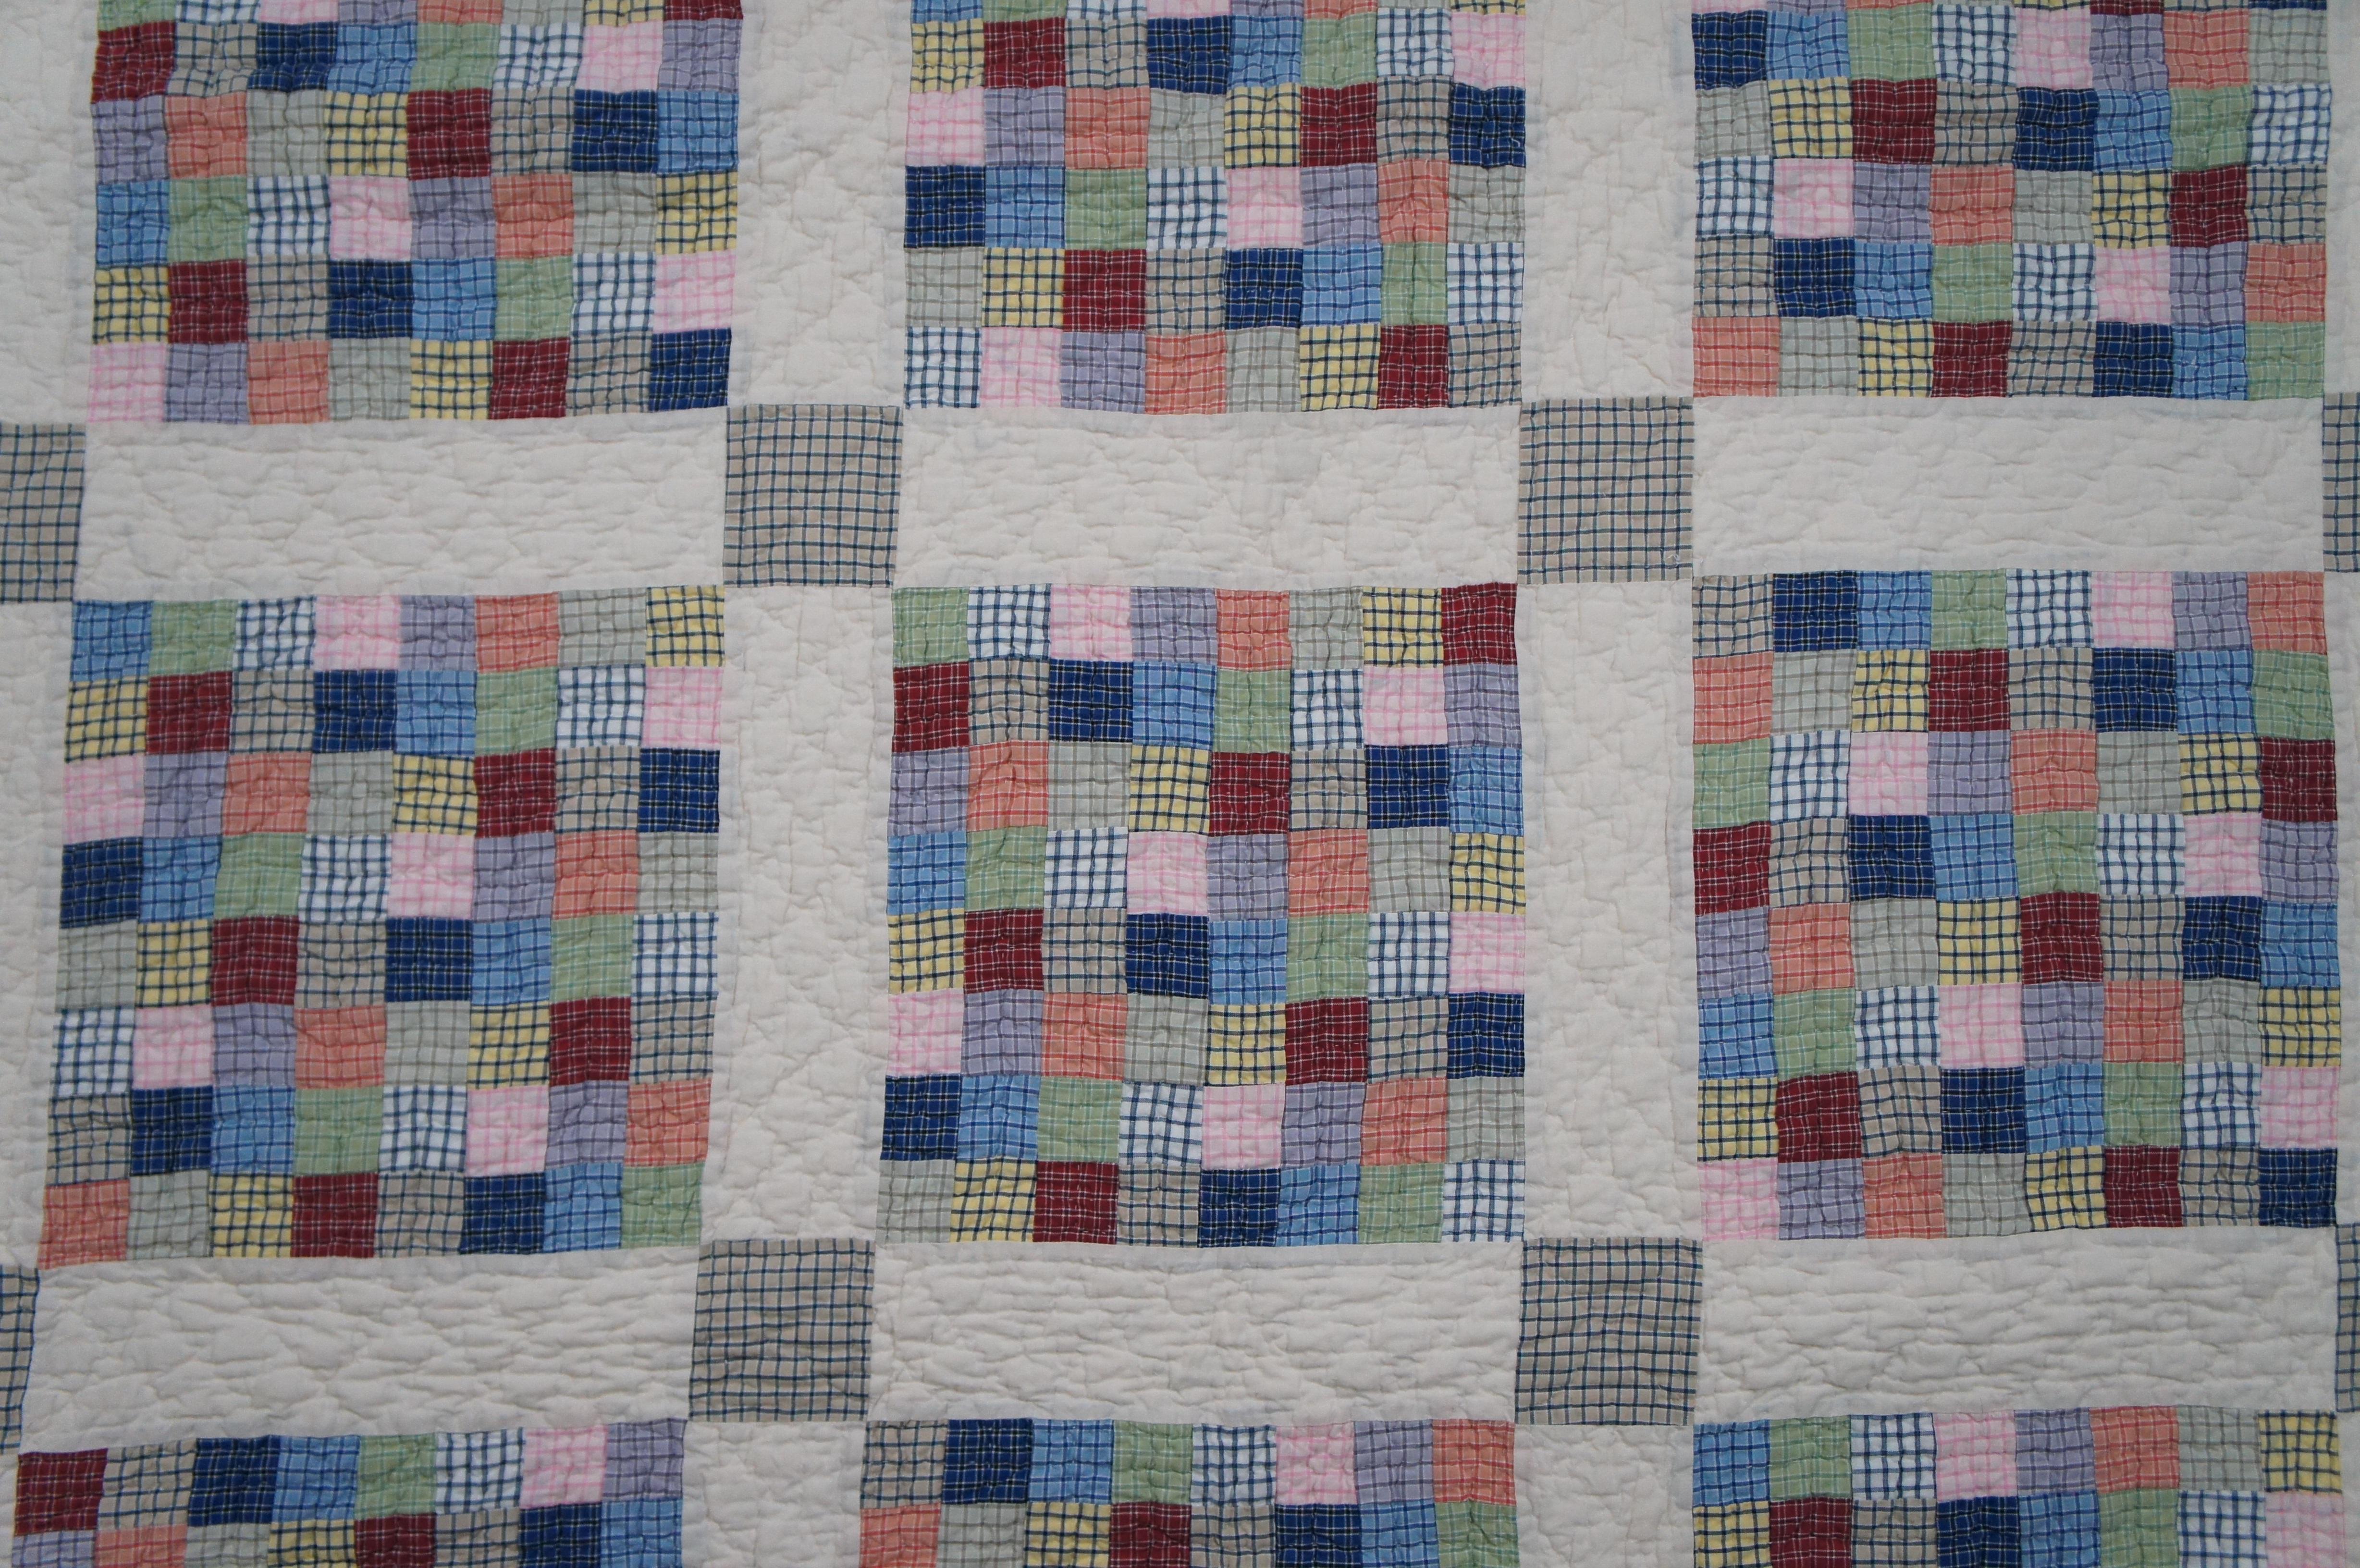 Antique Folk Art Stitched Geometric Patchwork Quilt Blanket Gingham Check In Good Condition For Sale In Dayton, OH